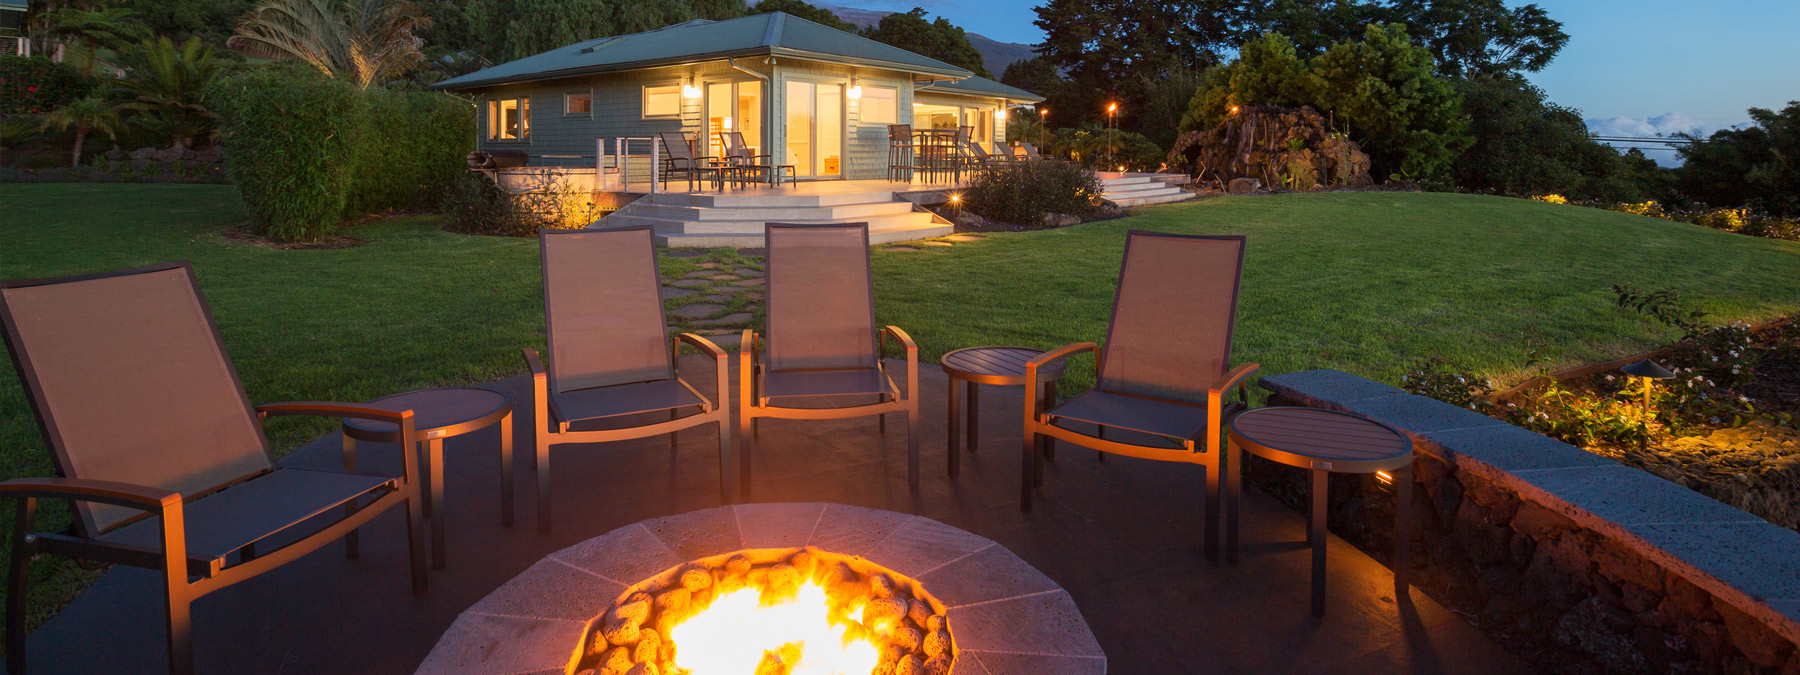 Fire Pits & Outdoor Living